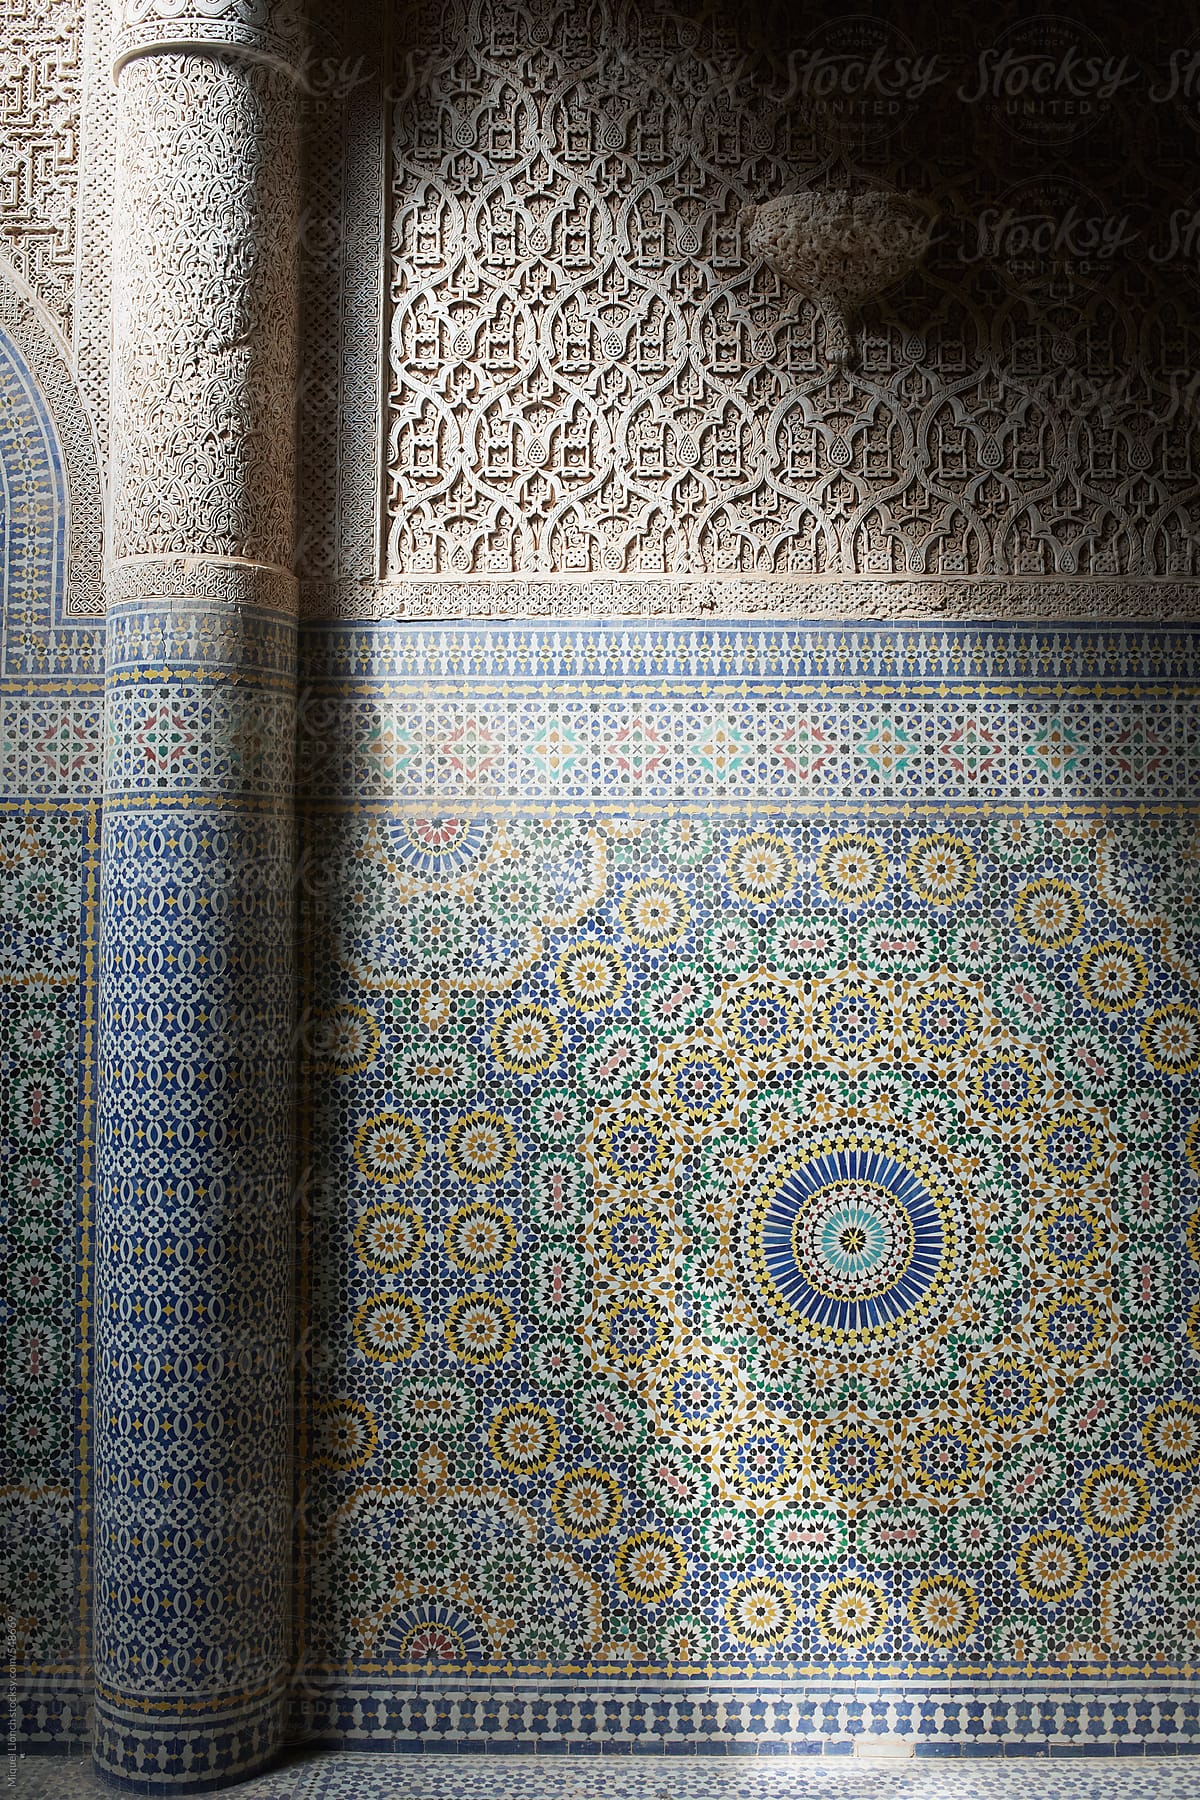 Interior of arab palace decorated with old ceramics